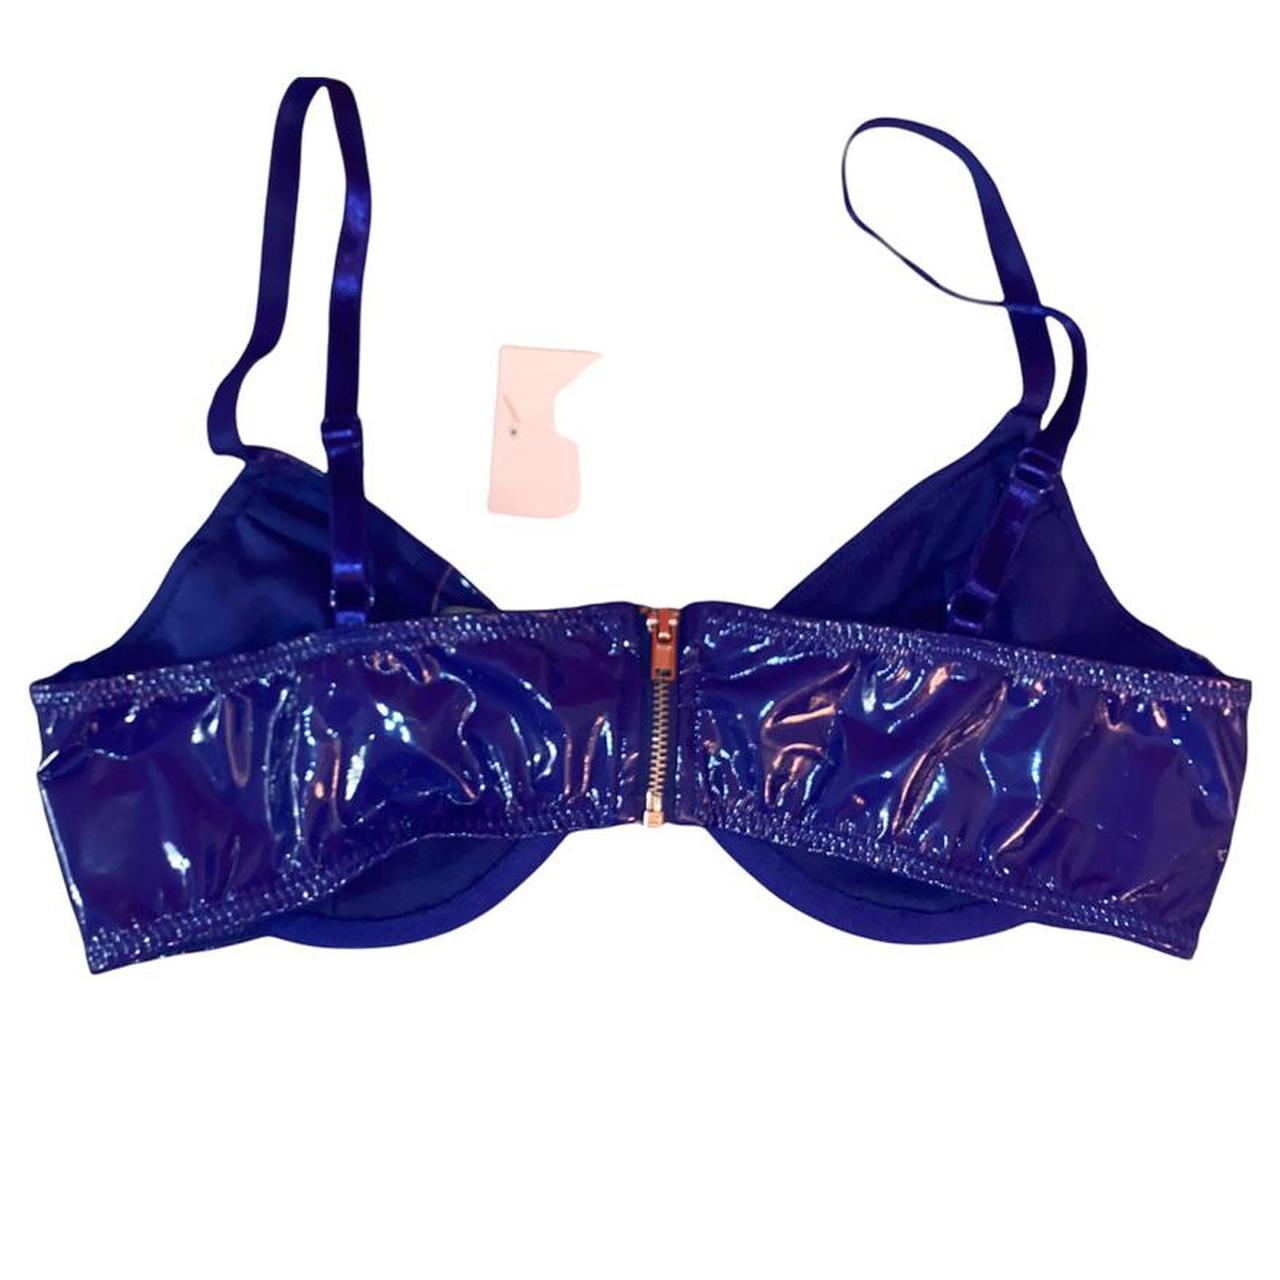 Product Image 3 - BLUE BRALETTE! Never worn with